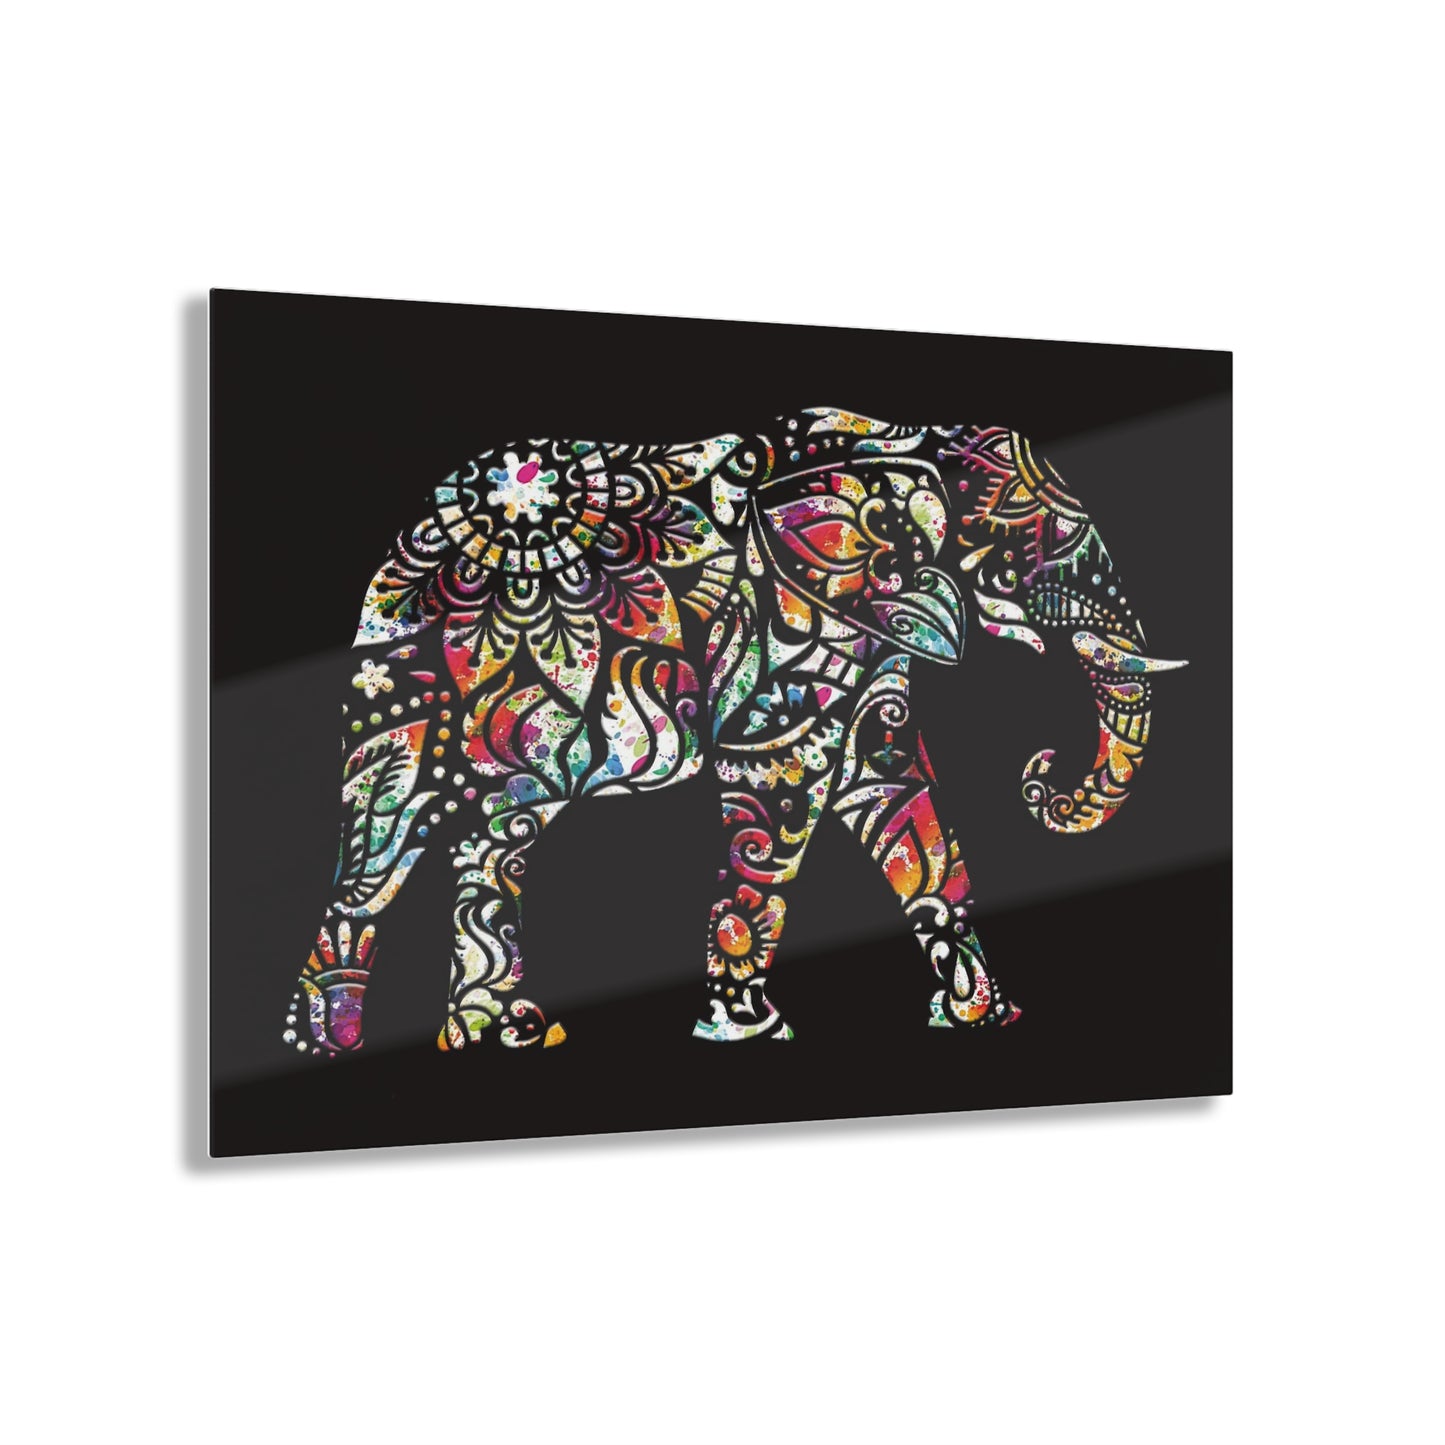 Elephant Themed Wall Art - Multicolor Indian Elephant on Black Background Printed on a Crystal Clear Acrylic Panel